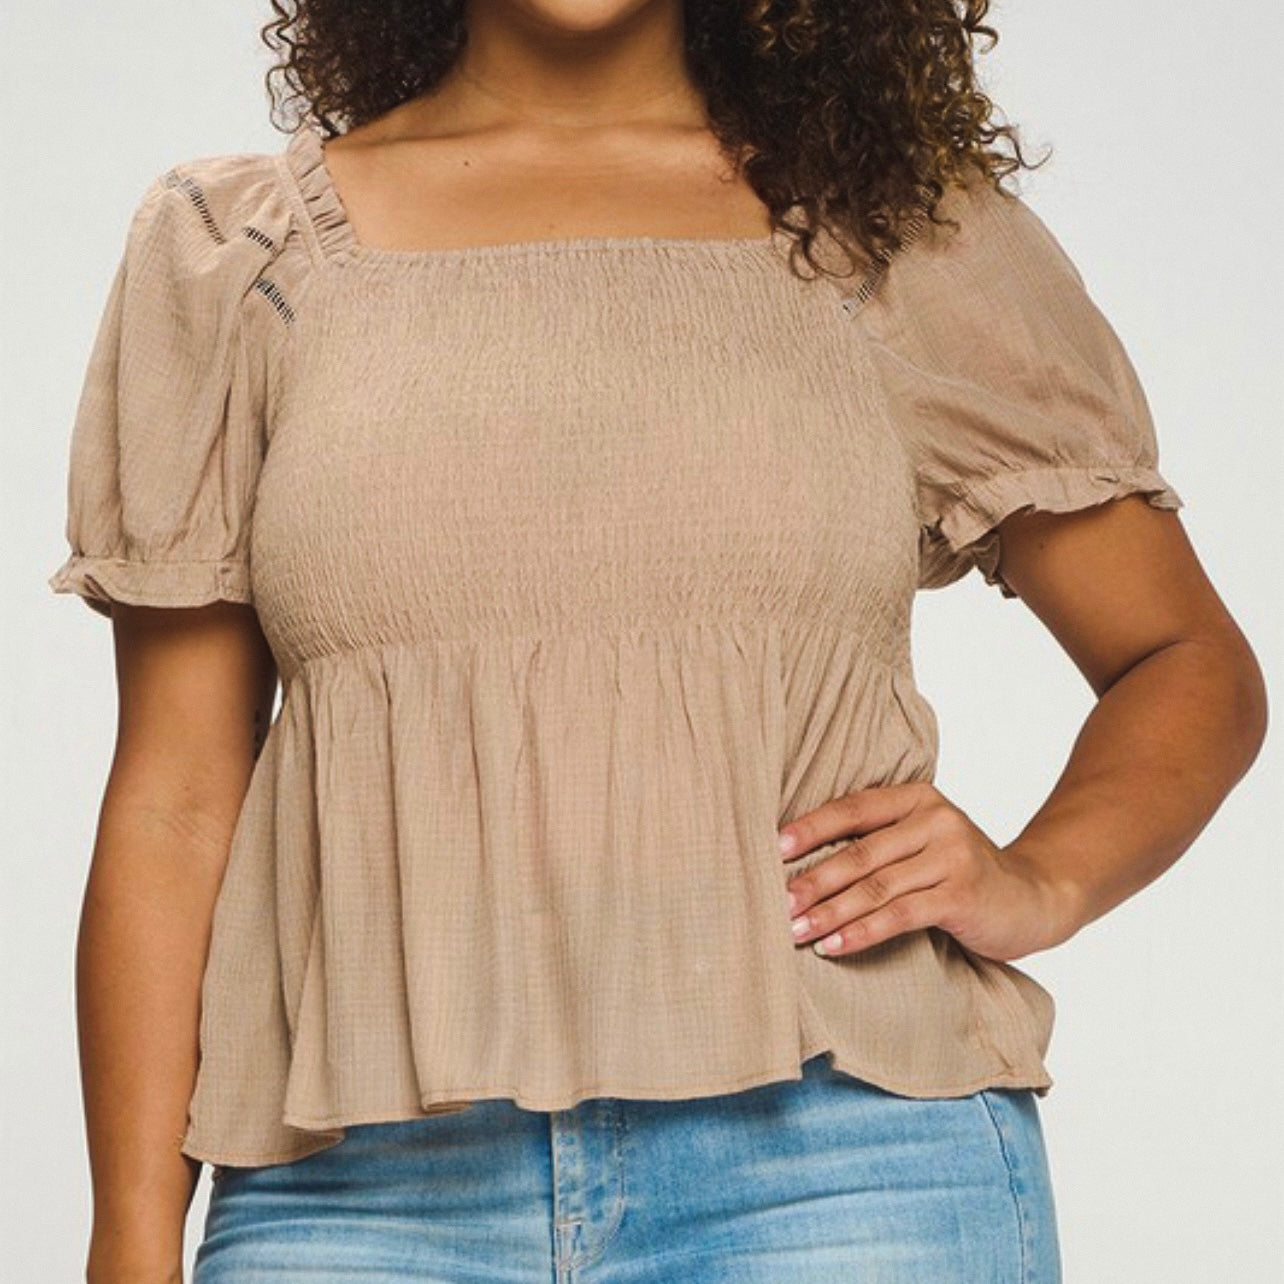 Mocha puff sleeve top with a square neckline, a shirred bodice, and a puplum style. This has a very nice stretch to it & is sheer material where it flares out under the bust. 